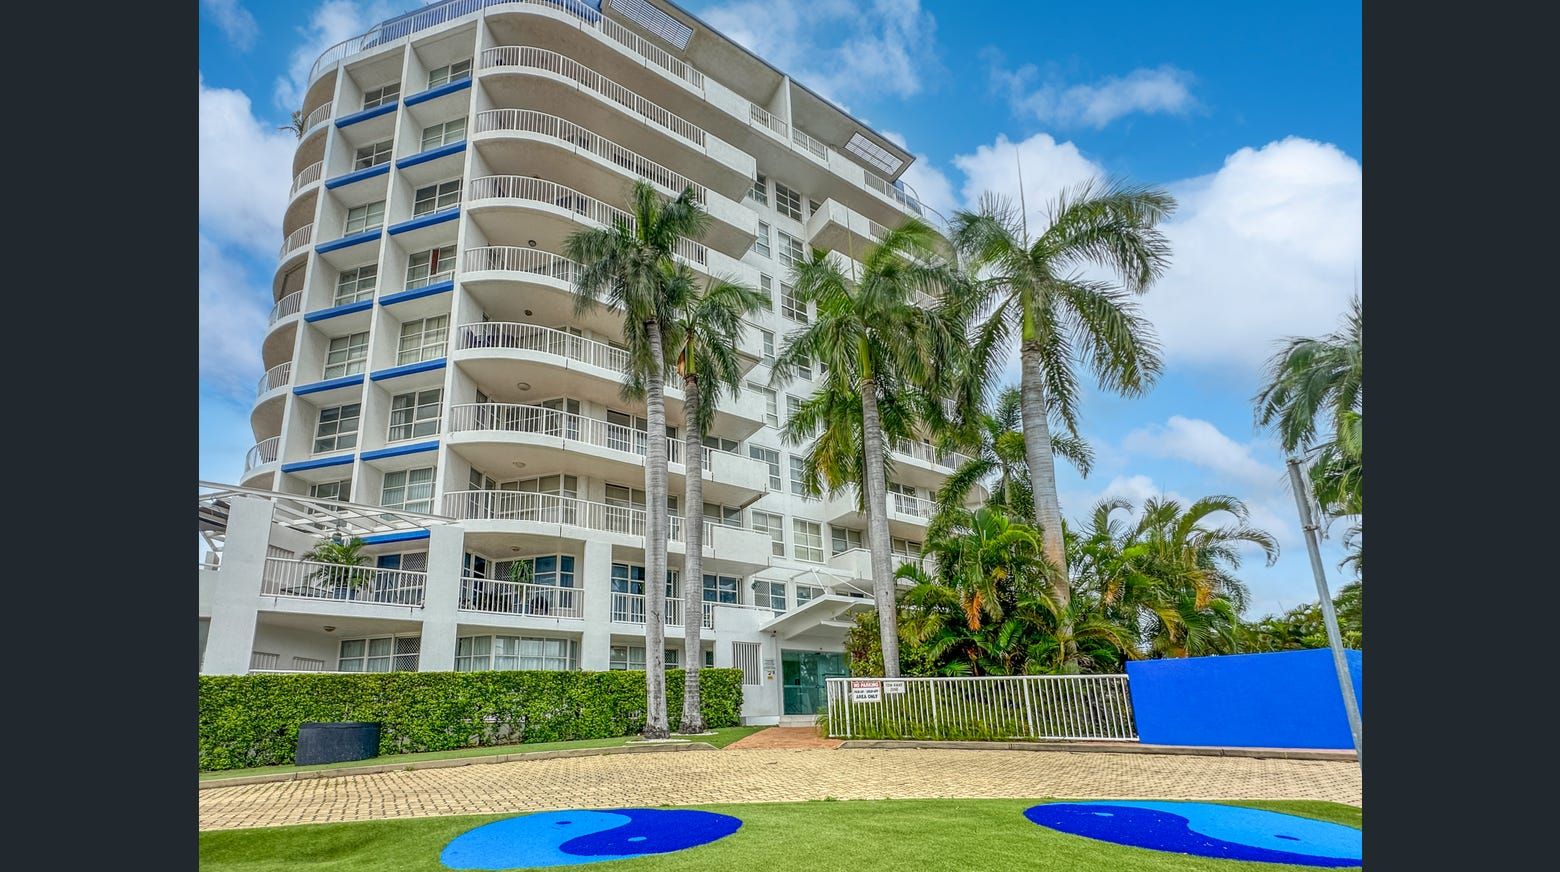 2C/3-7 The Strand , Townsville City QLD 4810